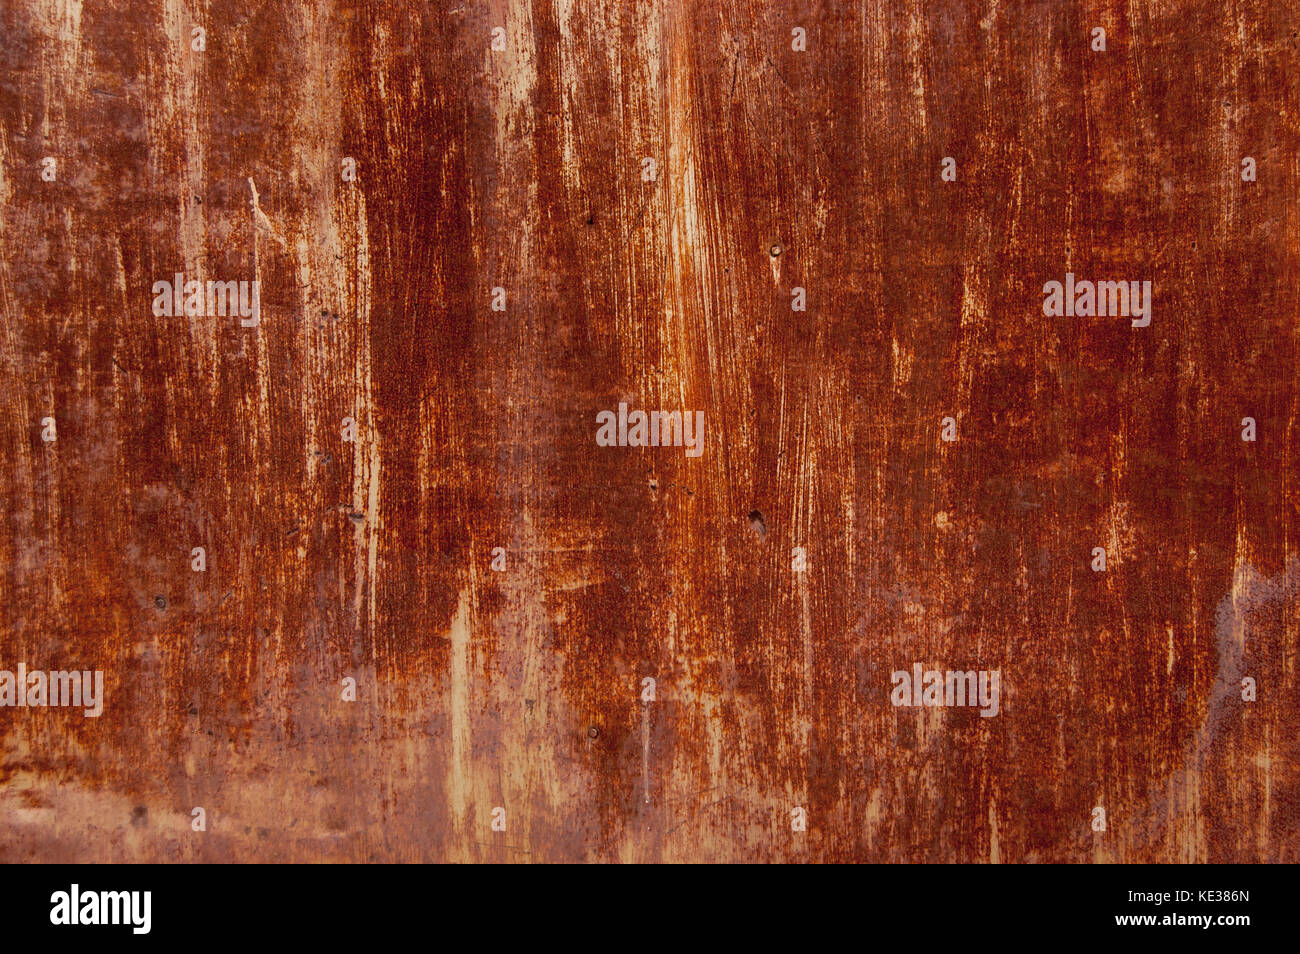 rusty grunge background with space for text or image Stock Photo